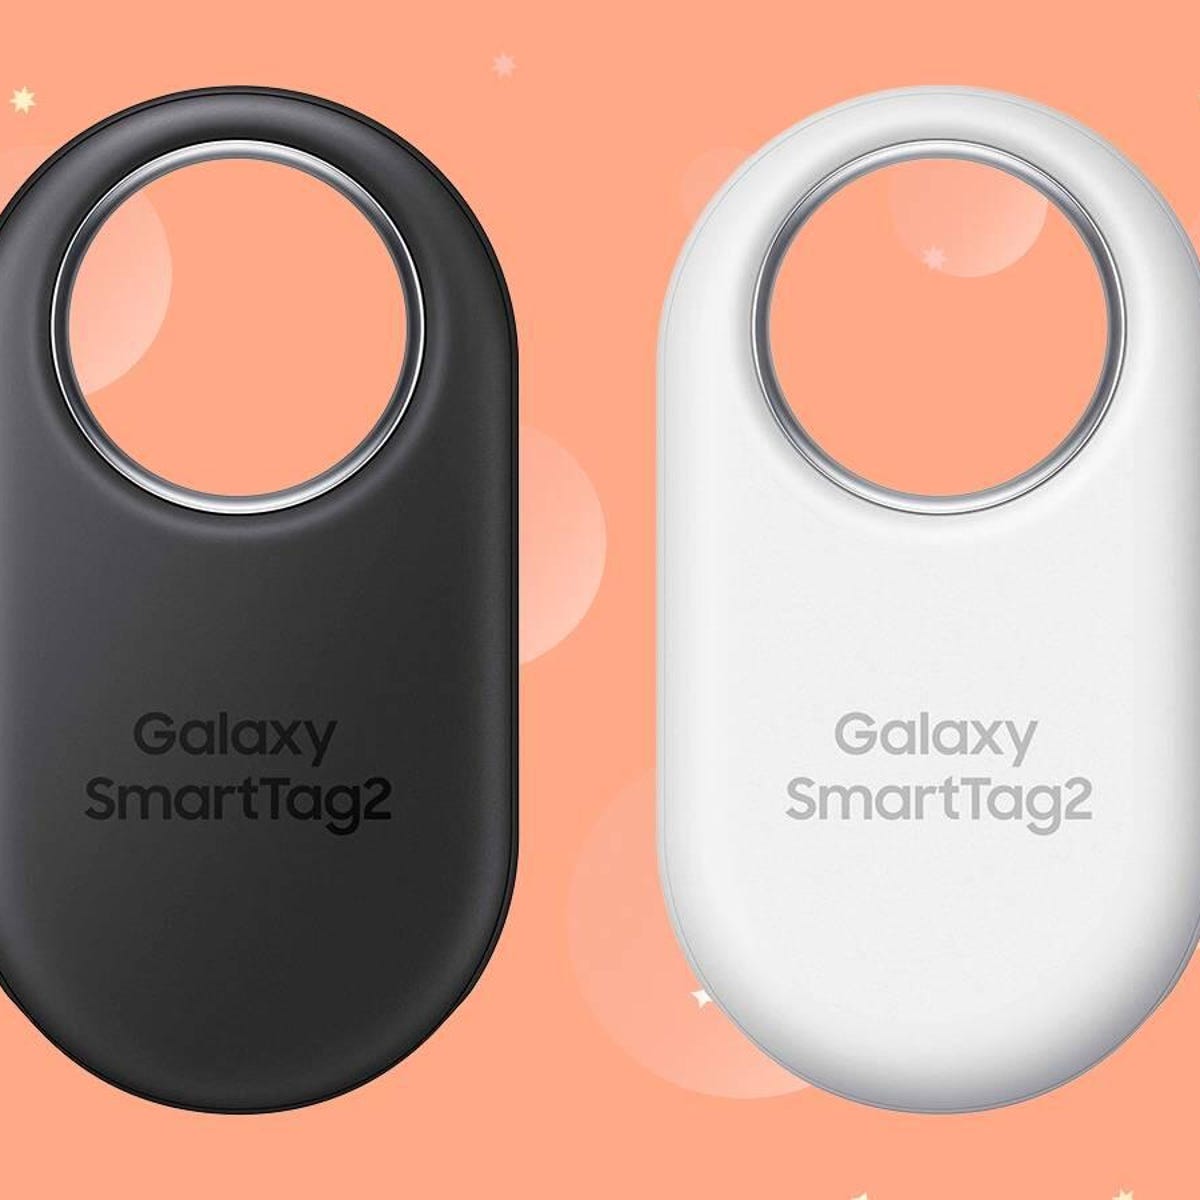 Samsung's New $30 SmartTag 2 Takes On Apple AirTags - CNET